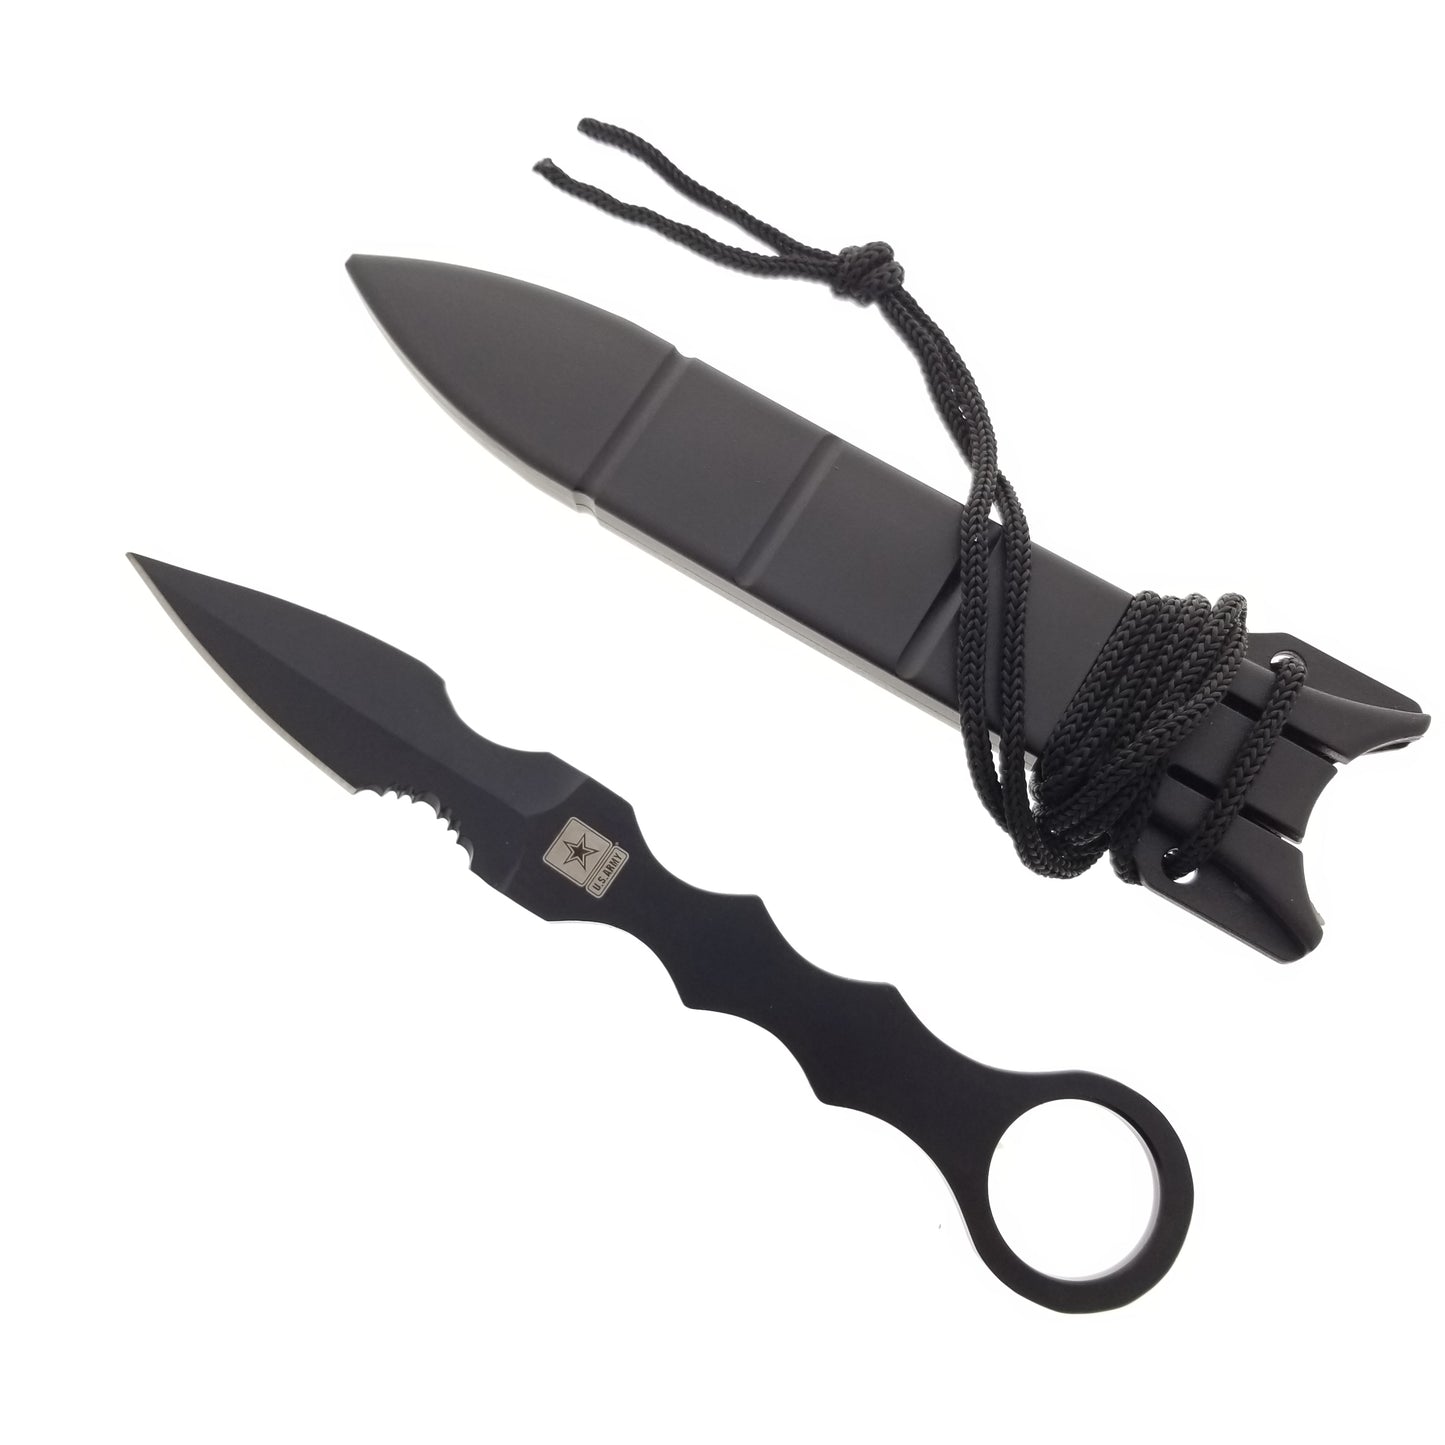 7.75" Fixed Blade Licensed US ARMY Tactical Dagger